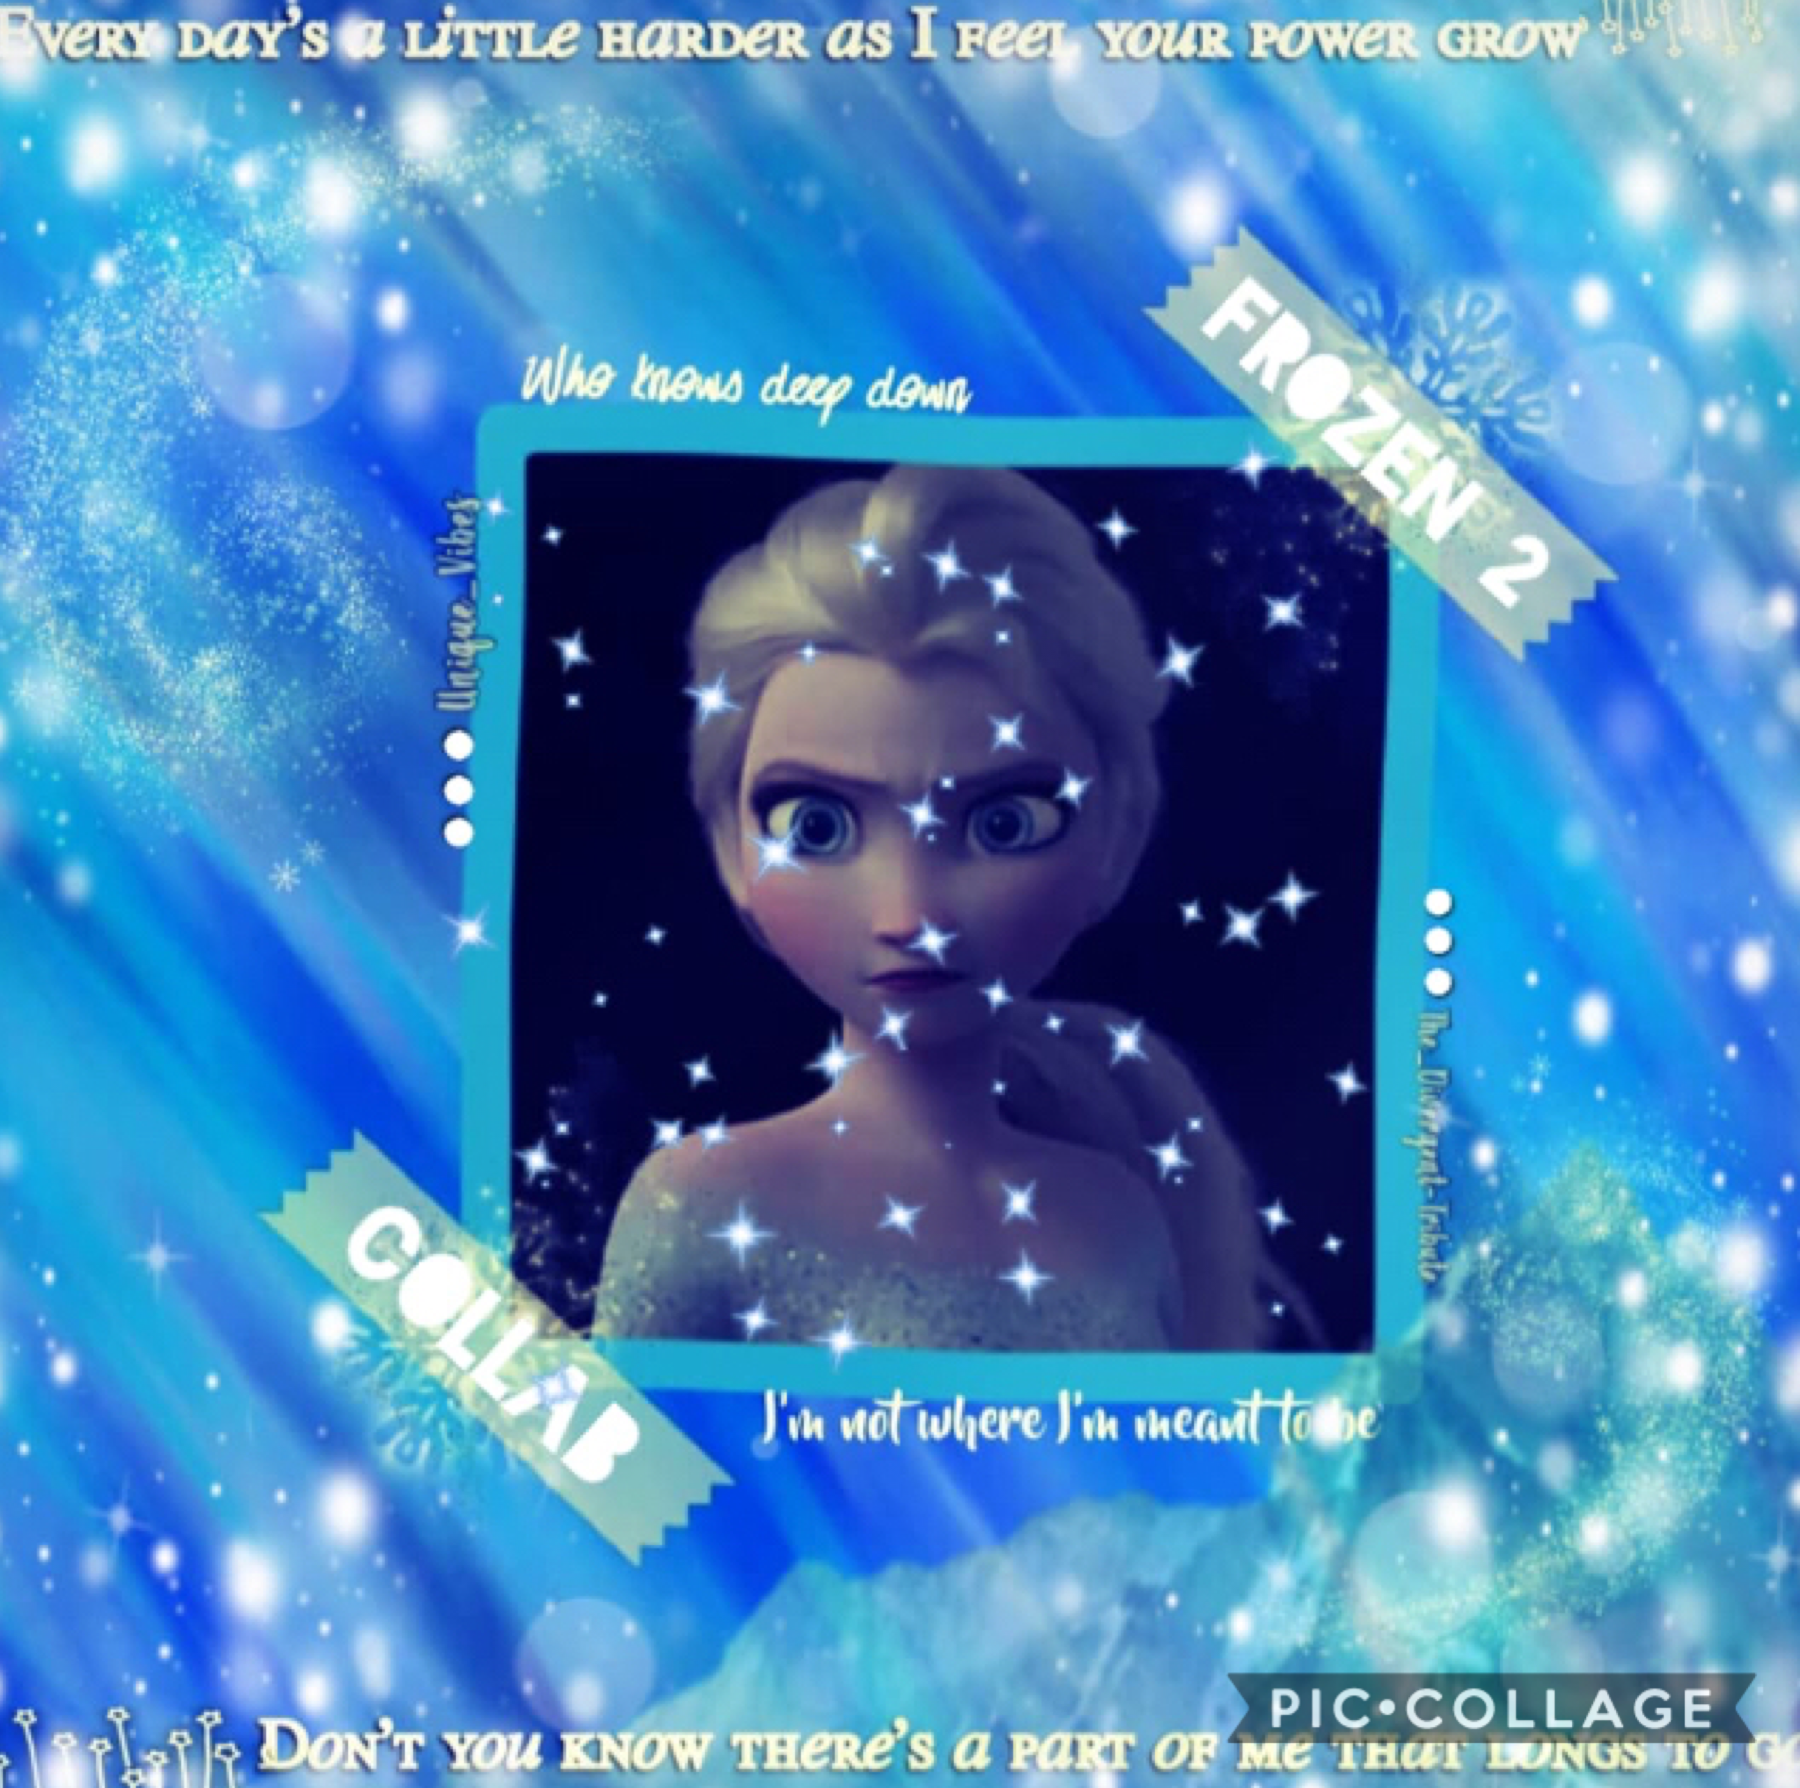 Collab with the amazing....
Divergent-tribute sorry if I spelt ur username wrong anyway Frozen two it is brilliant I did the background and she did the great text
Qotd: have you seen Frozen 2
Aotd: yes and I love it